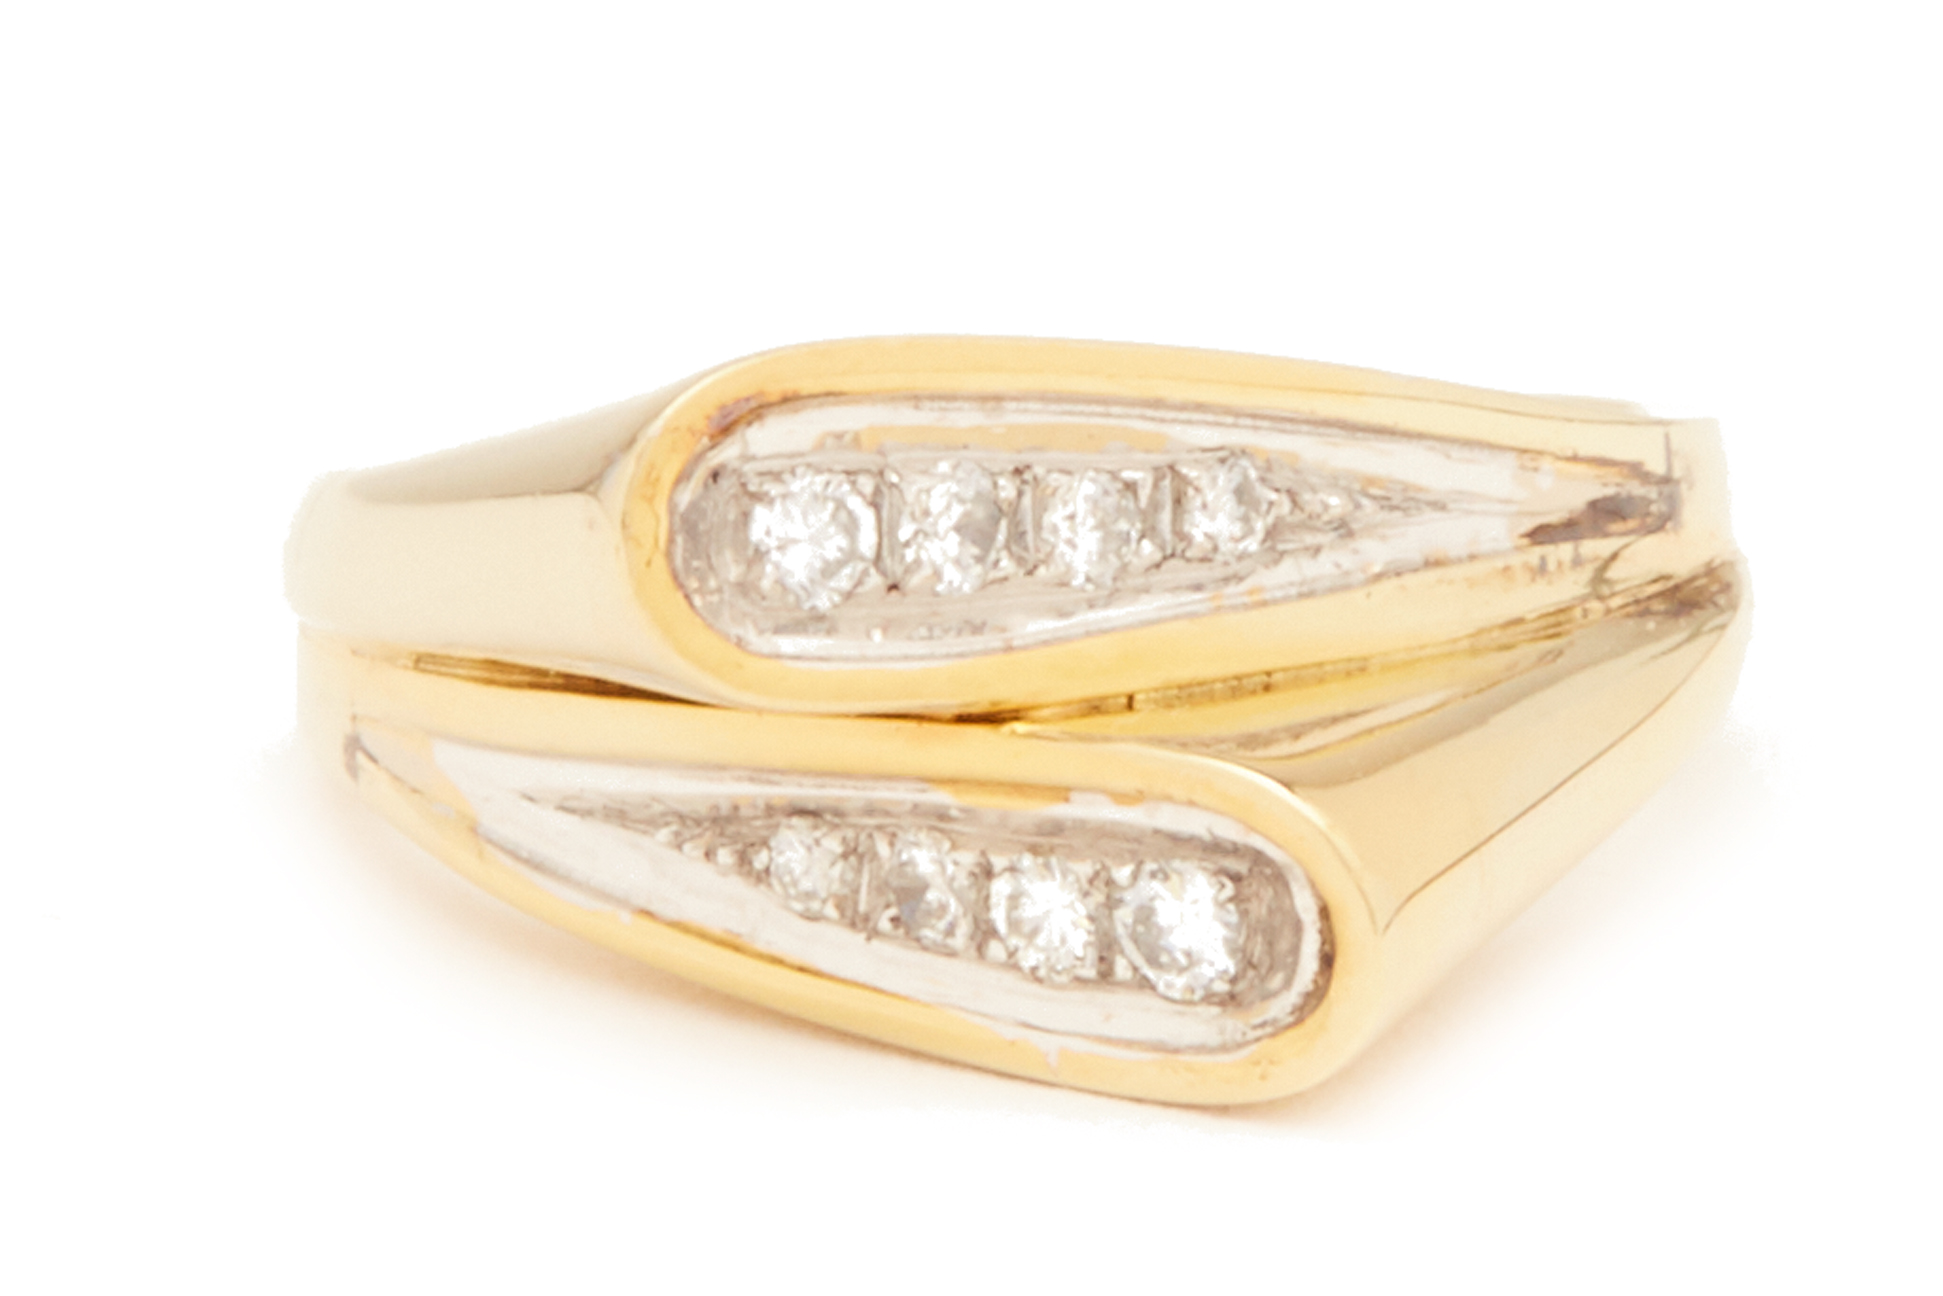 A SCULPTURAL GOLD AND DIAMOND RING